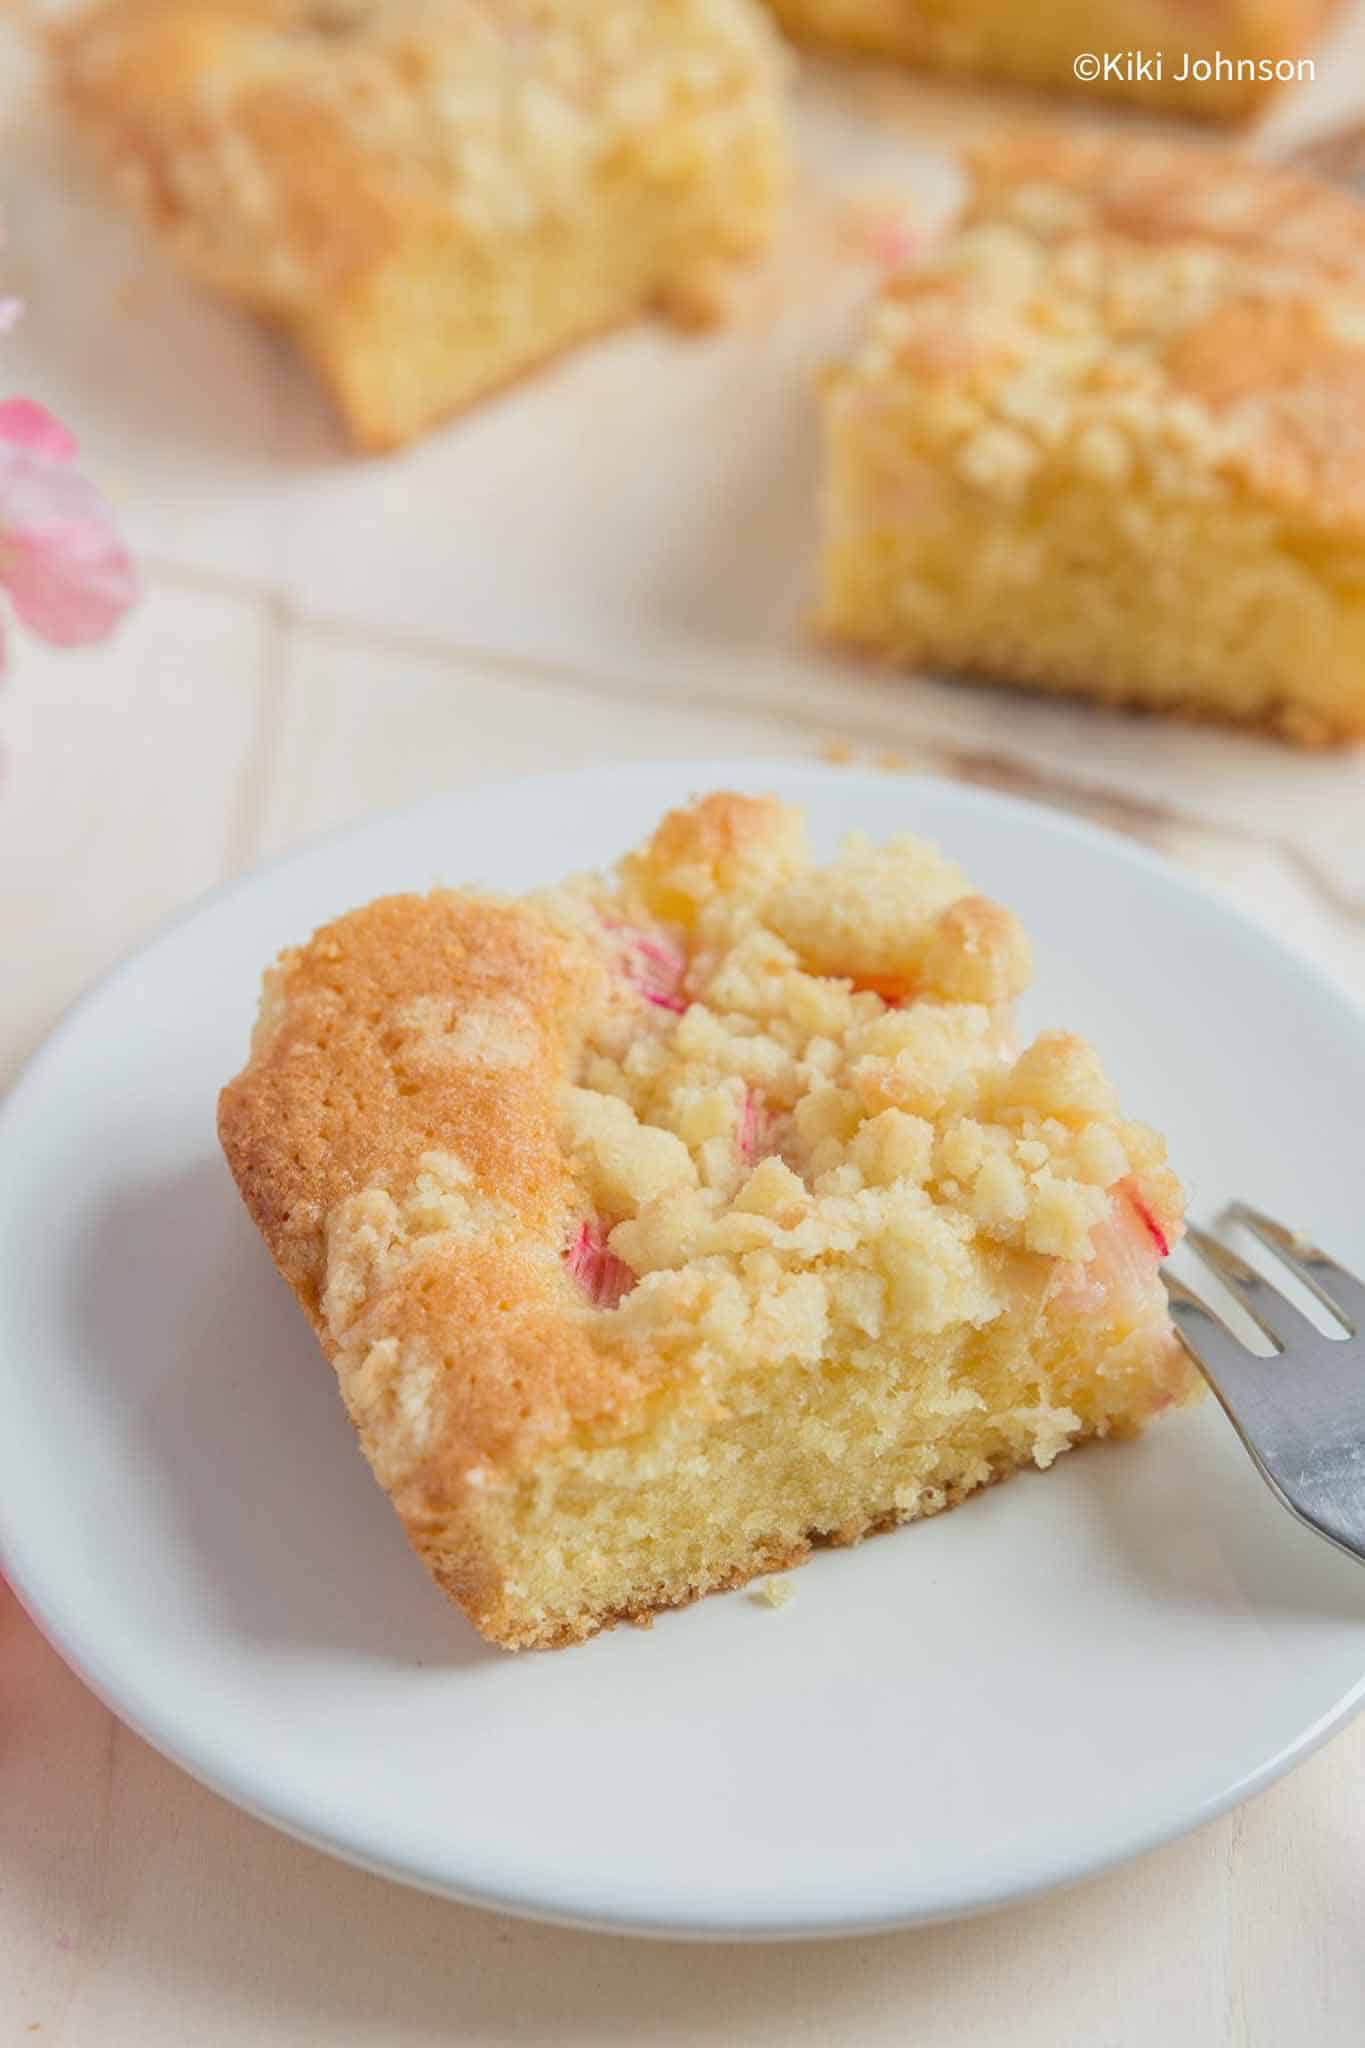 a piece of German Rhubarb Tray Bake with Streusel topping on a white cake plate